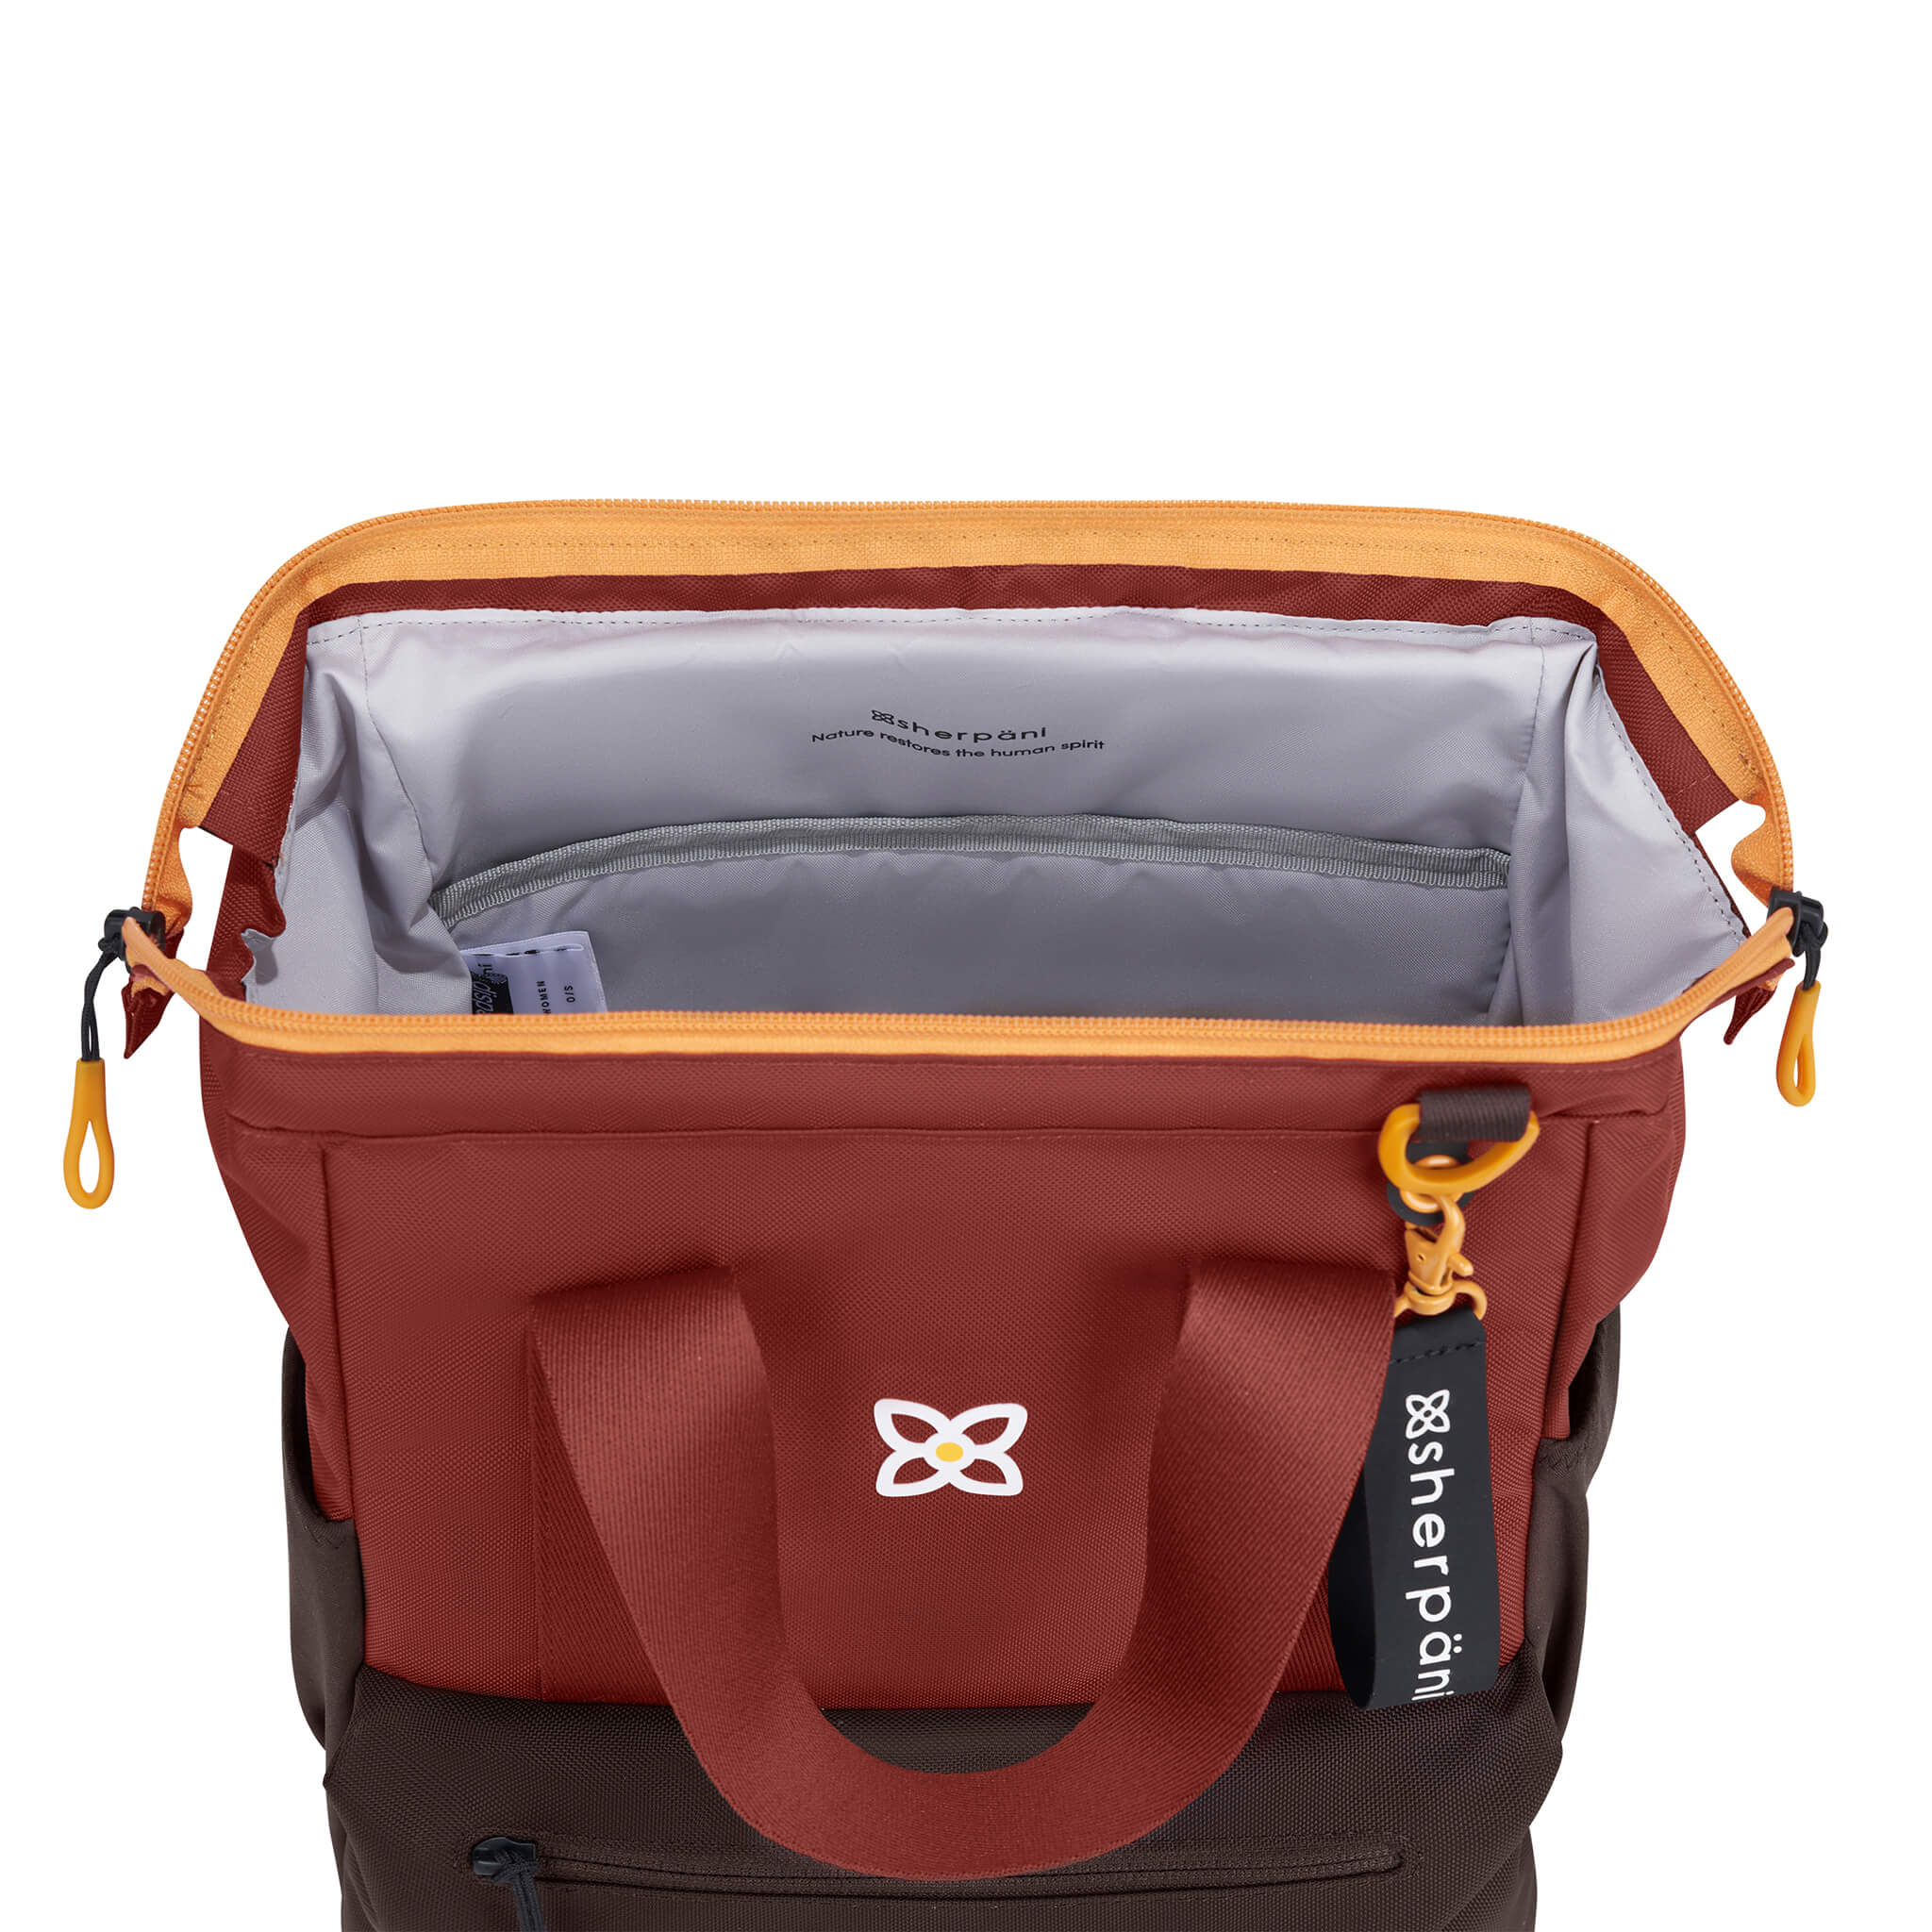 Inside view of Sherpani travel bag, the Dispatch. The main bag compartment features a rectangular frame and doctor bag style opening so you can see right to the bottom. 